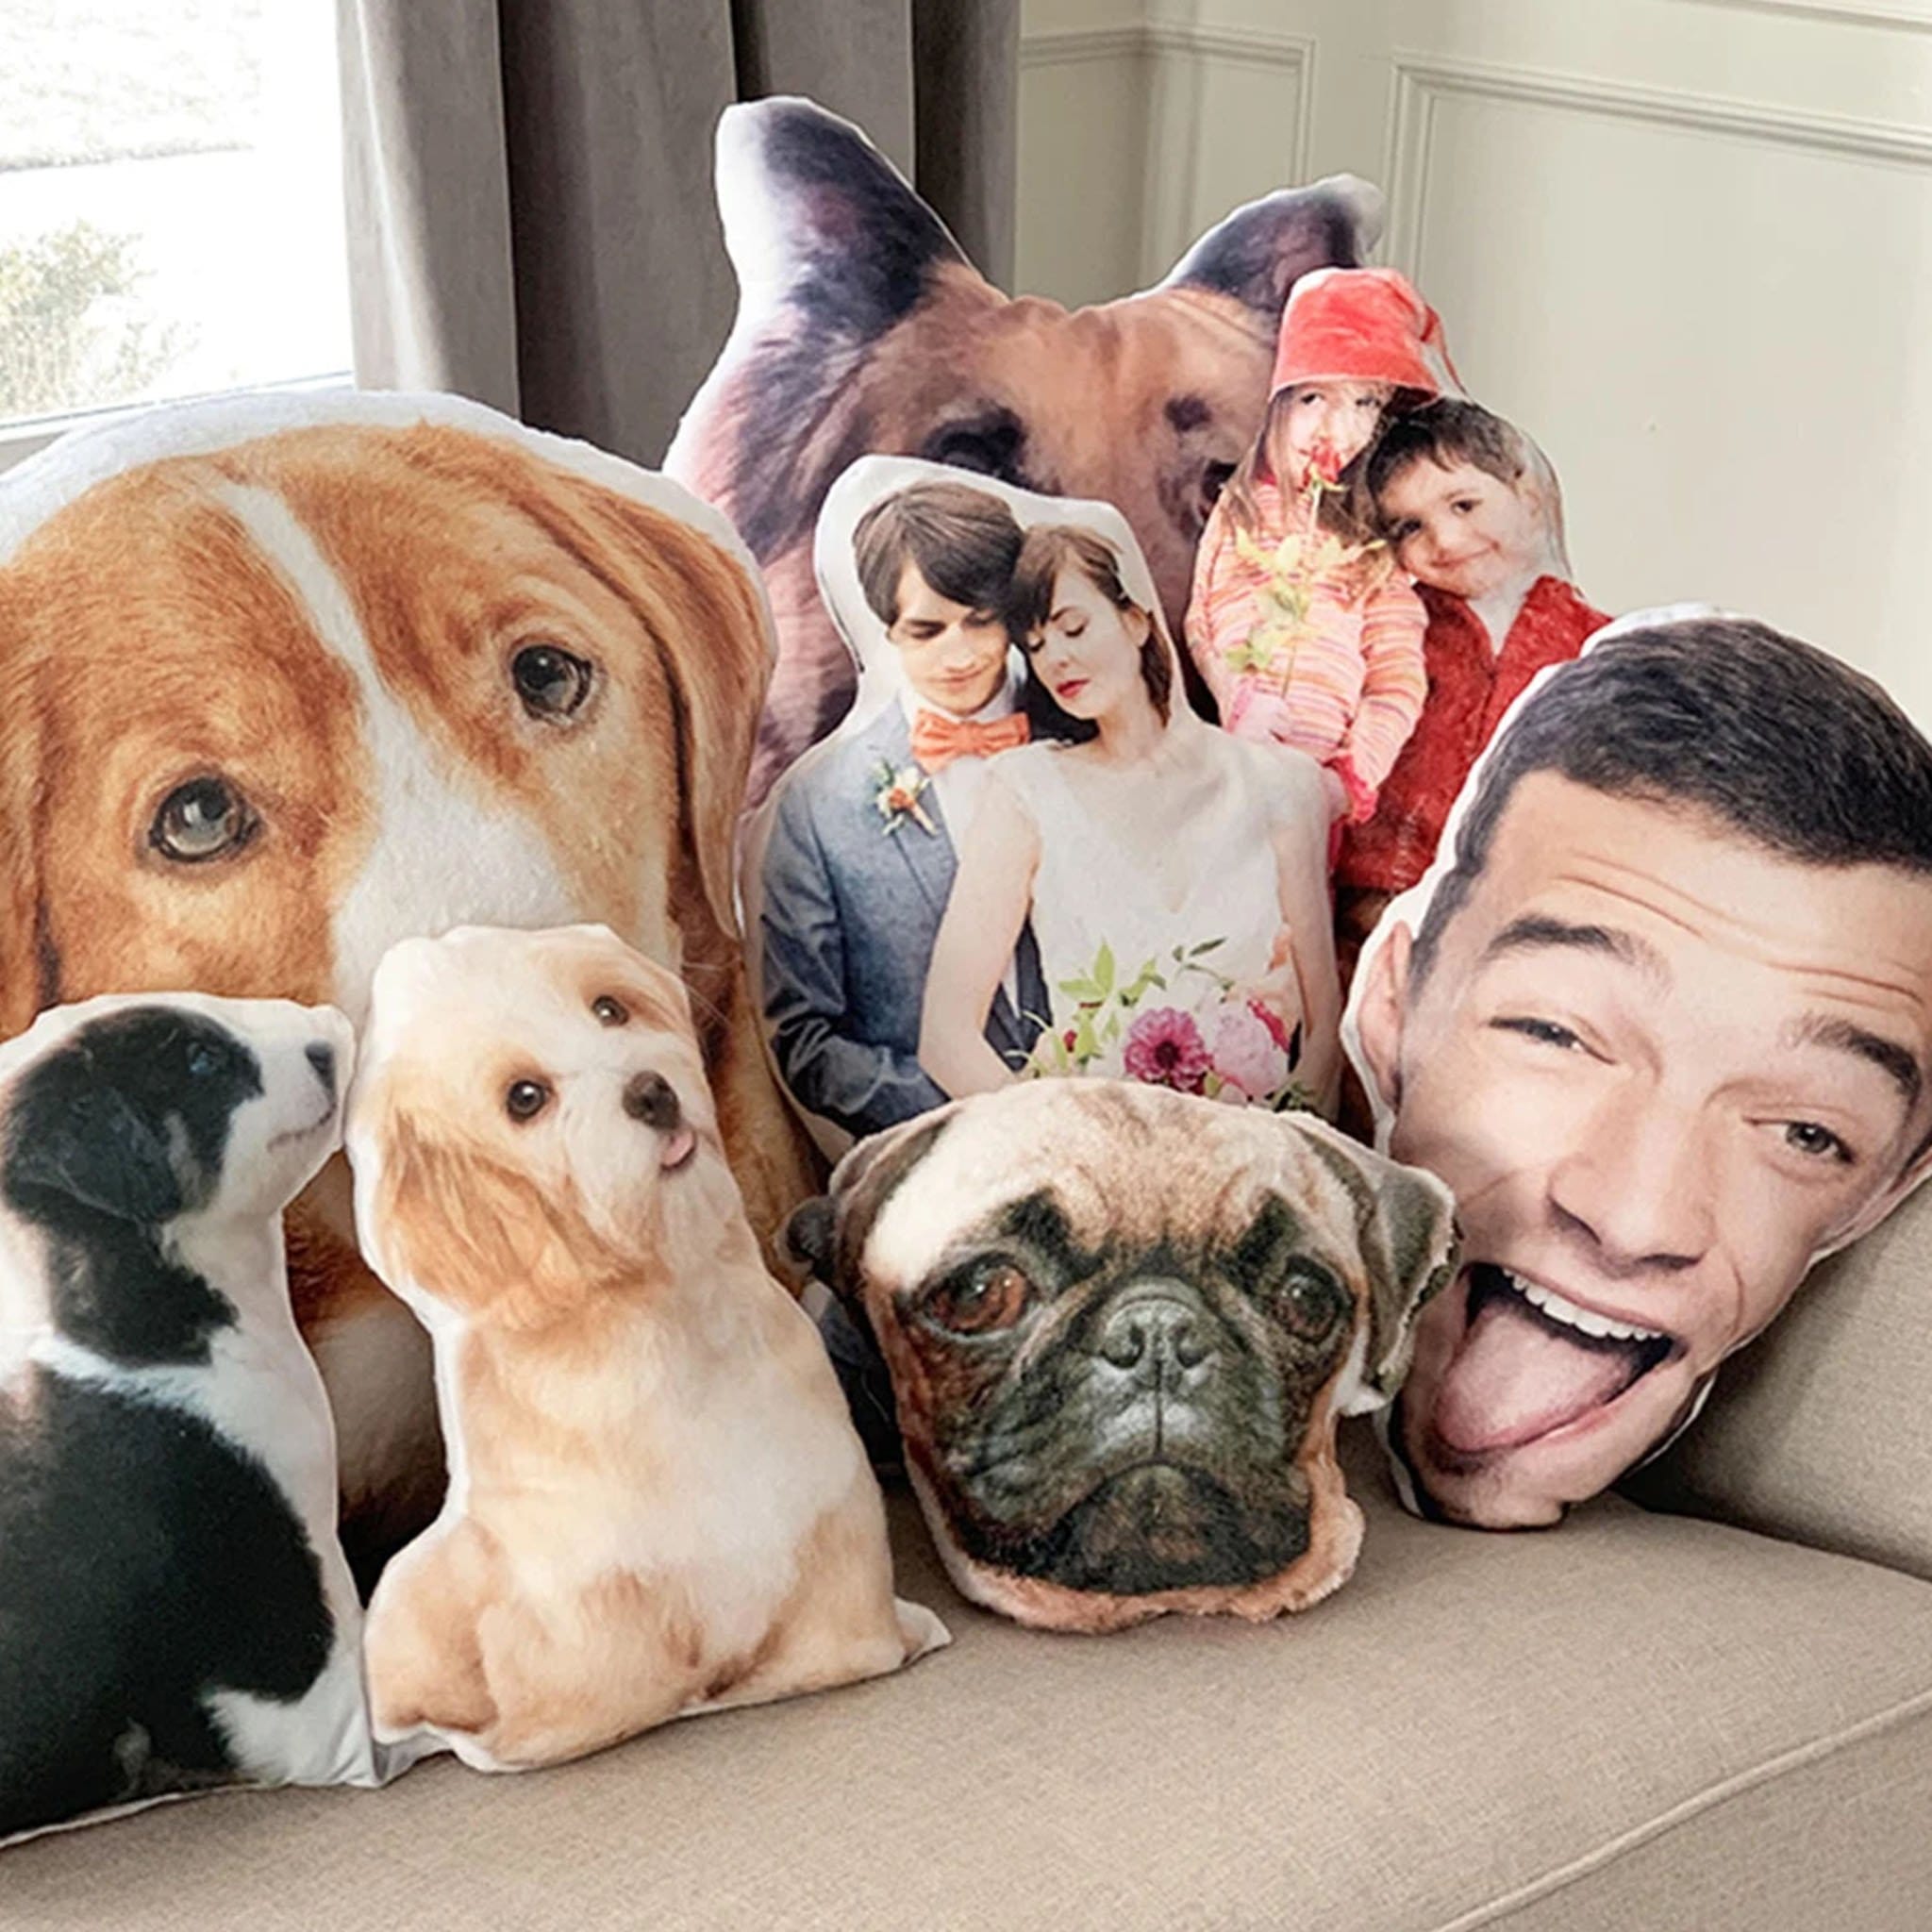 Personalized 3D Throw Pillow